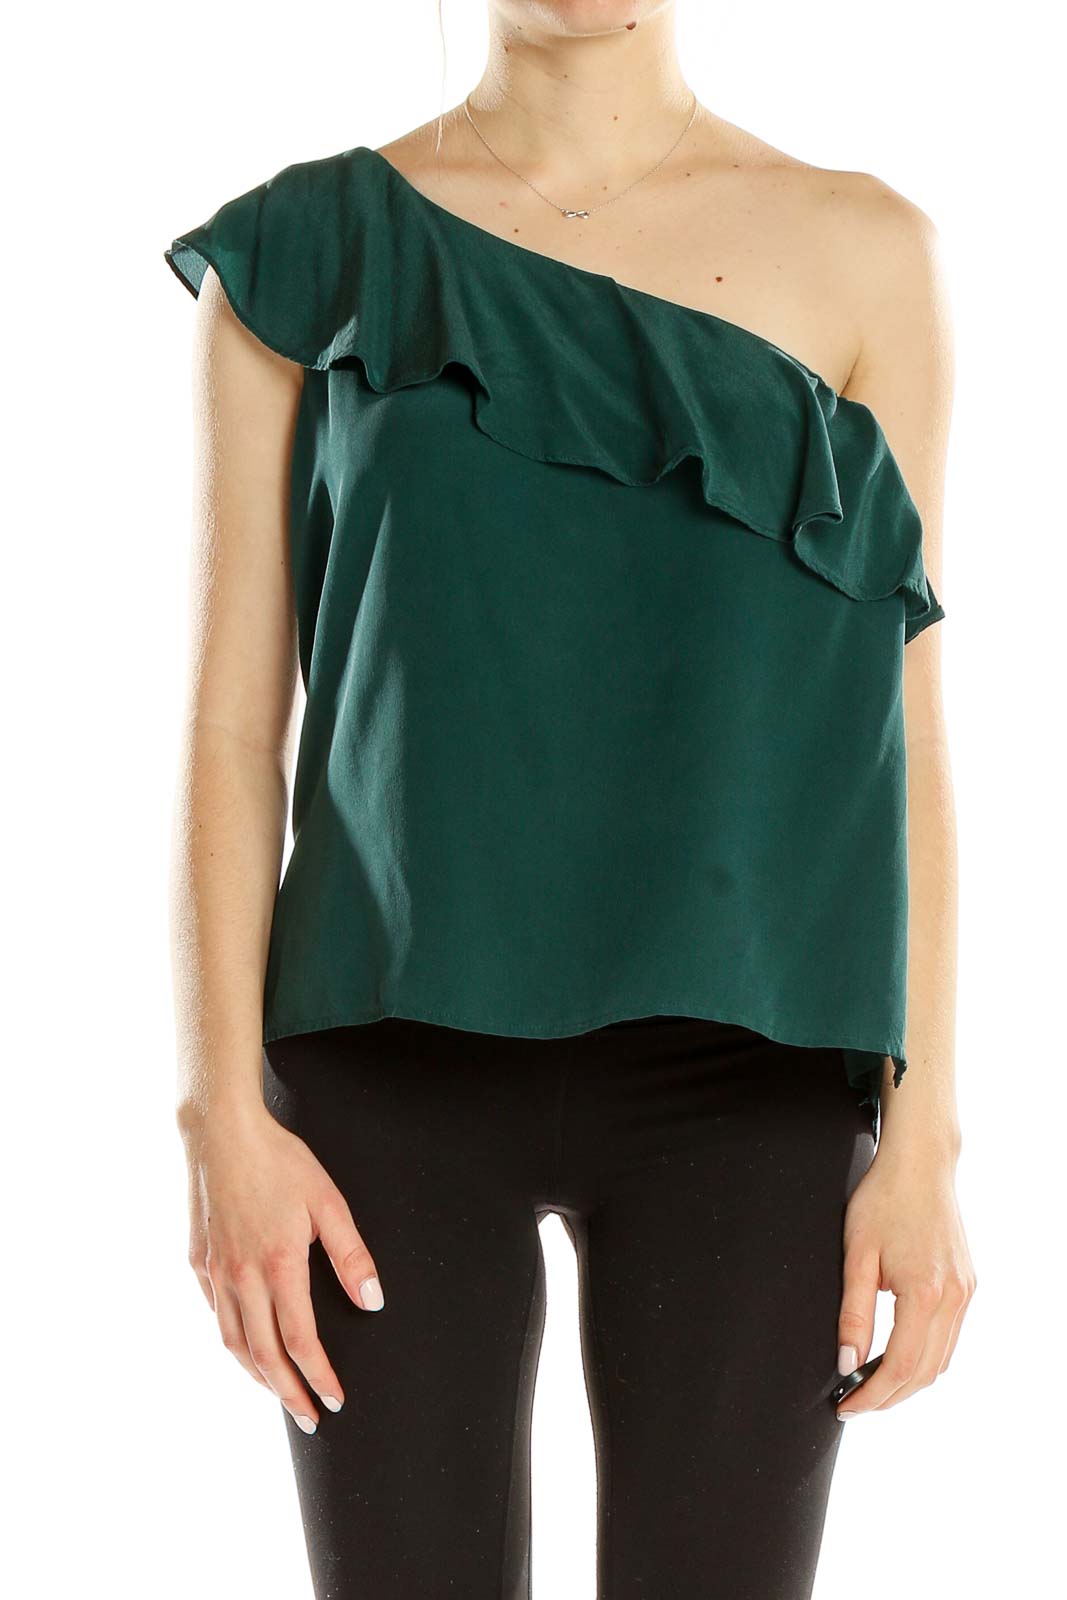 Green One Shoulder Ruffle Silk Blouse Front